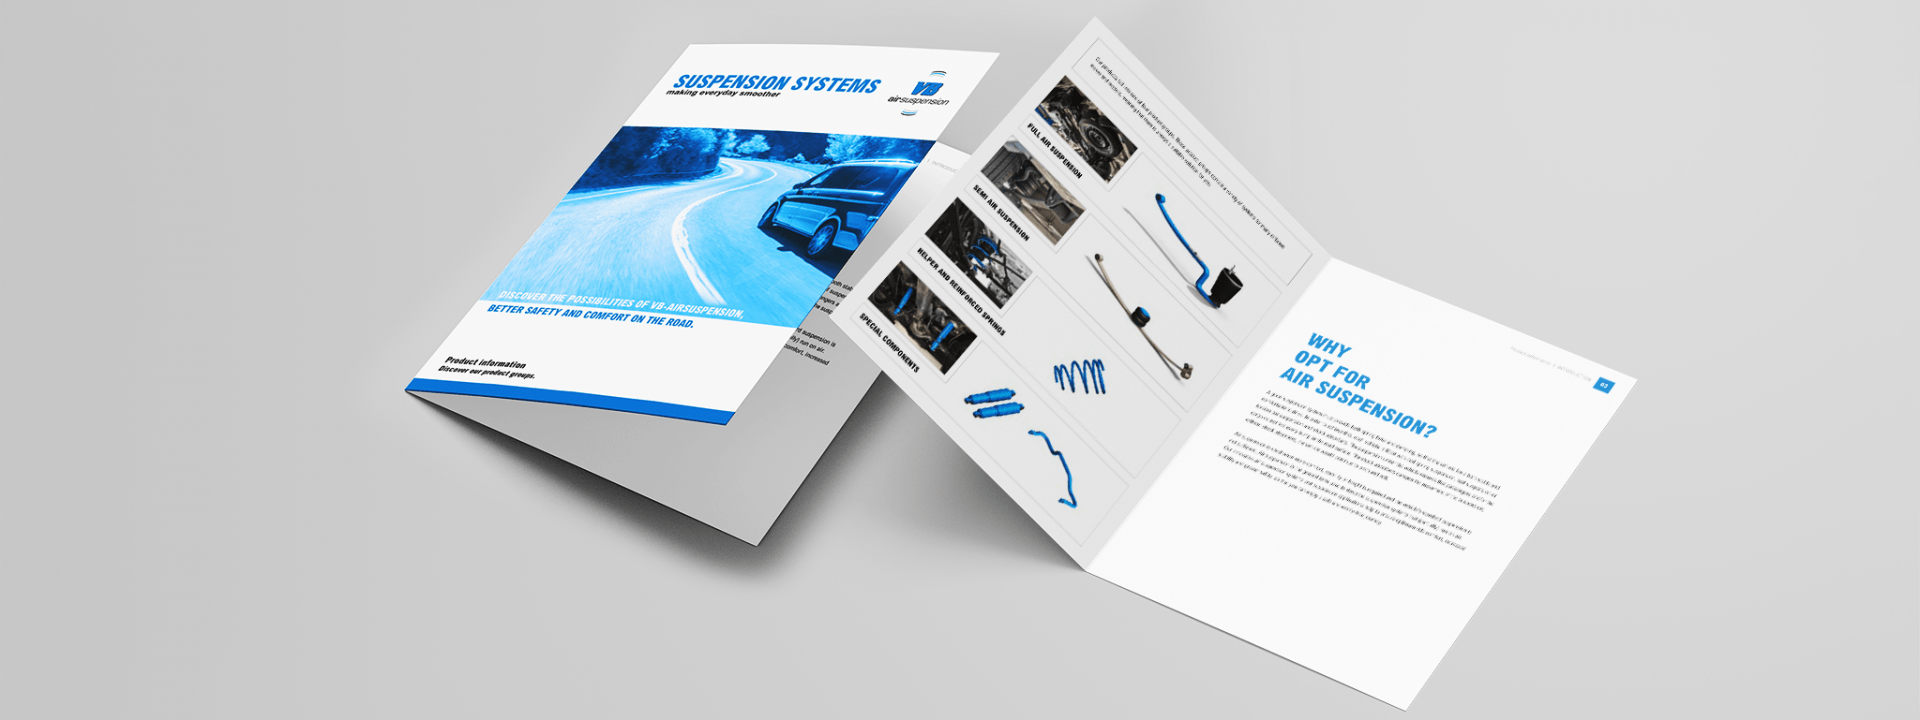 brochure product information